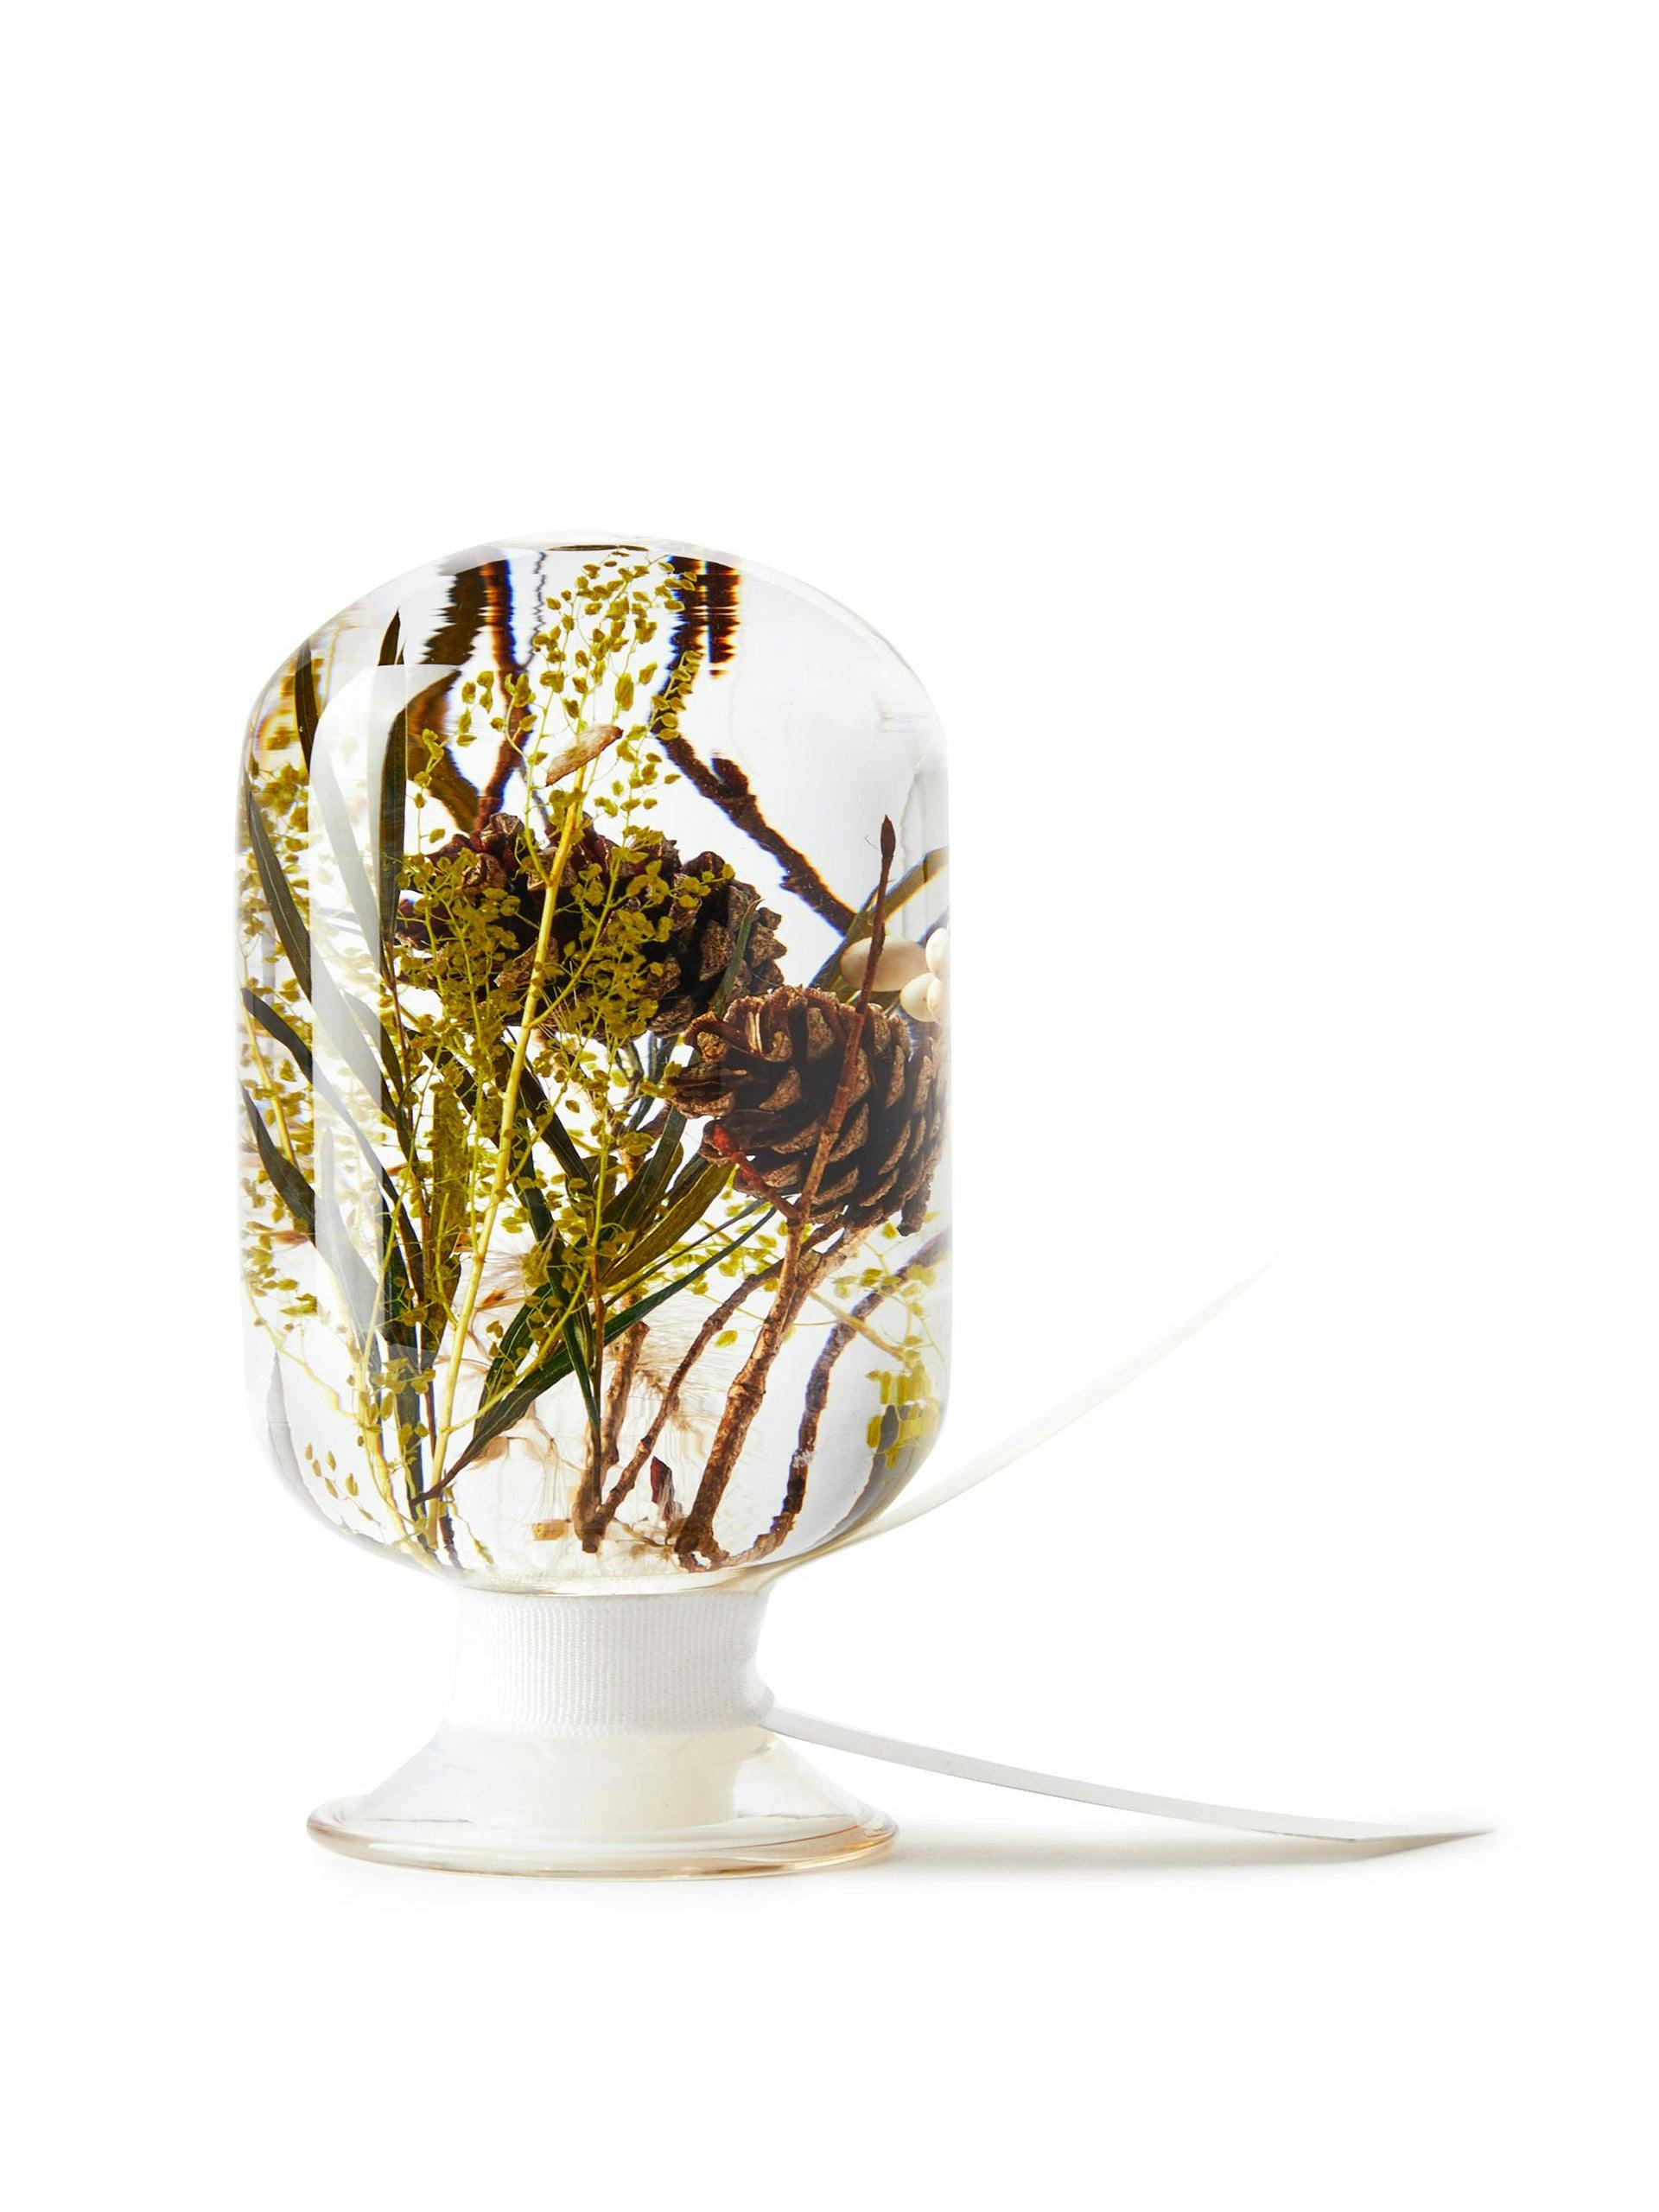 Glass plant paperweight